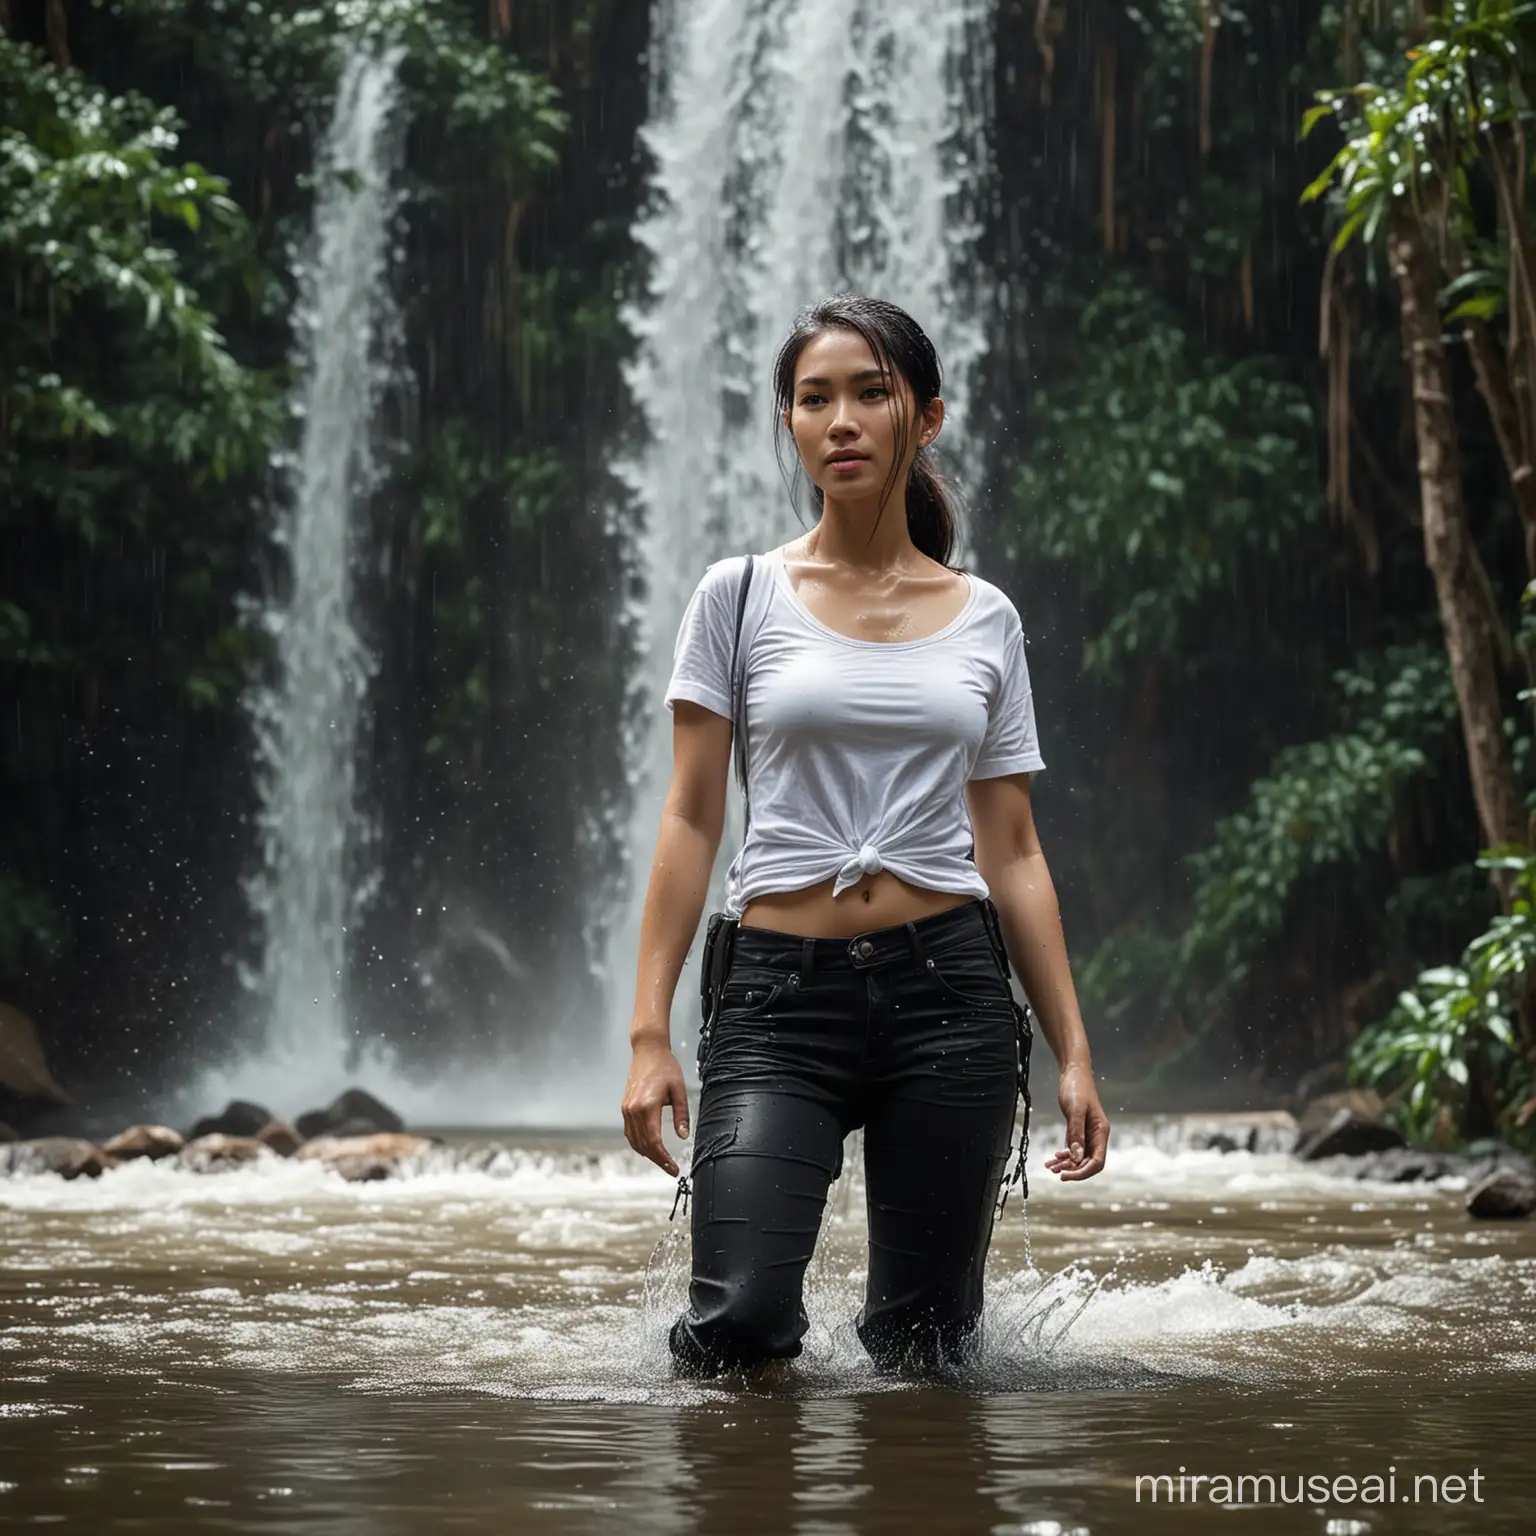 Thai Special Forces Woman in Forest Environment Tactical Maneuvers by Waterfalls